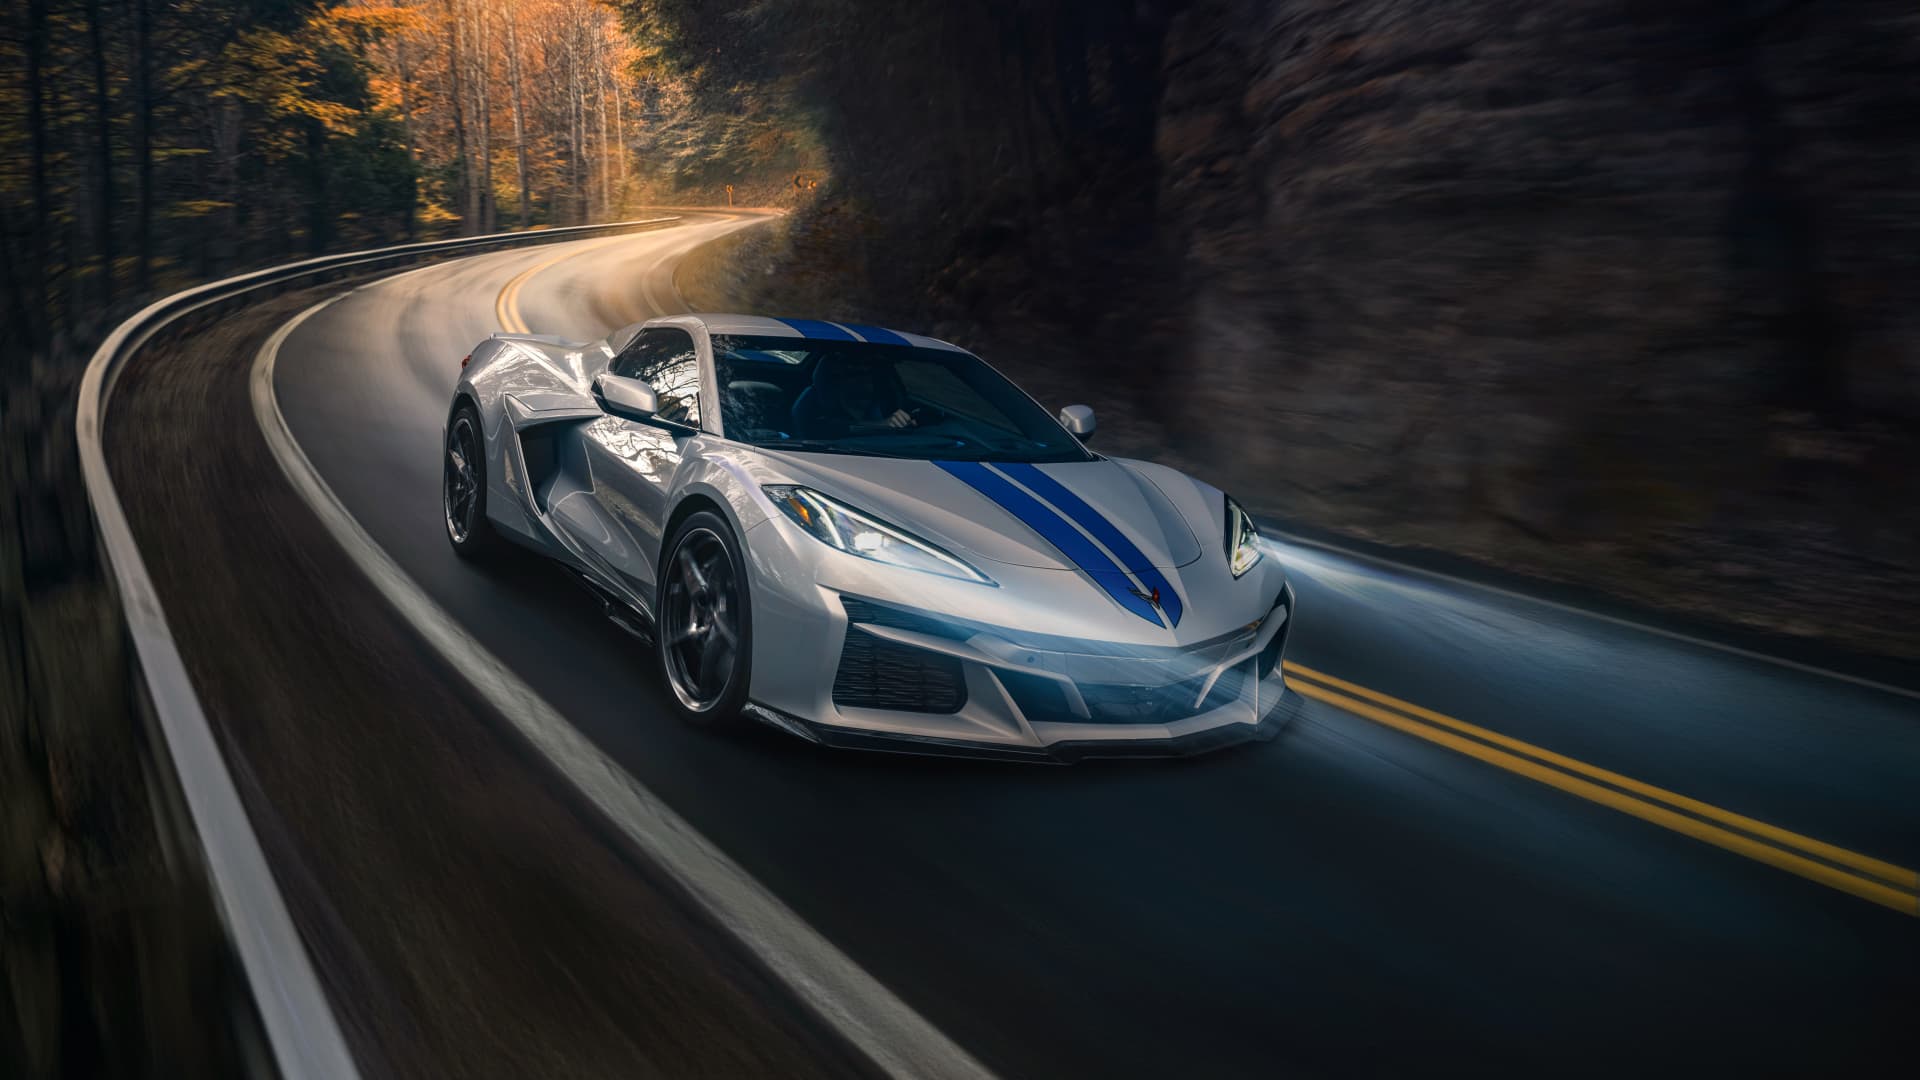 Why GM's new Chevy Corvette is a hybrid and not an all-electric car